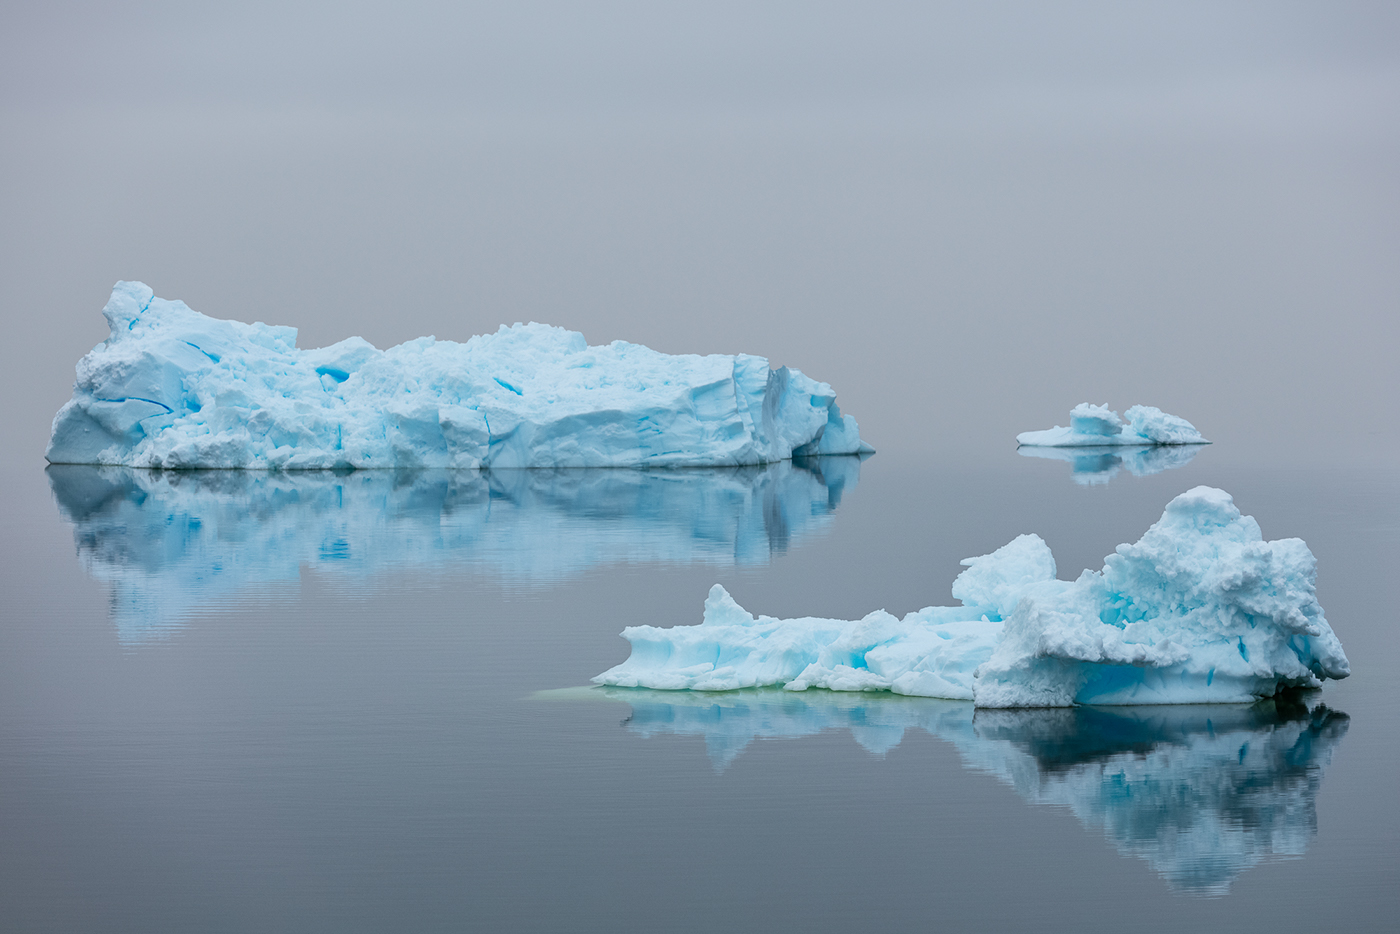 Antarcitca ice reflections icebergs cold stunning remarkable water Ocean